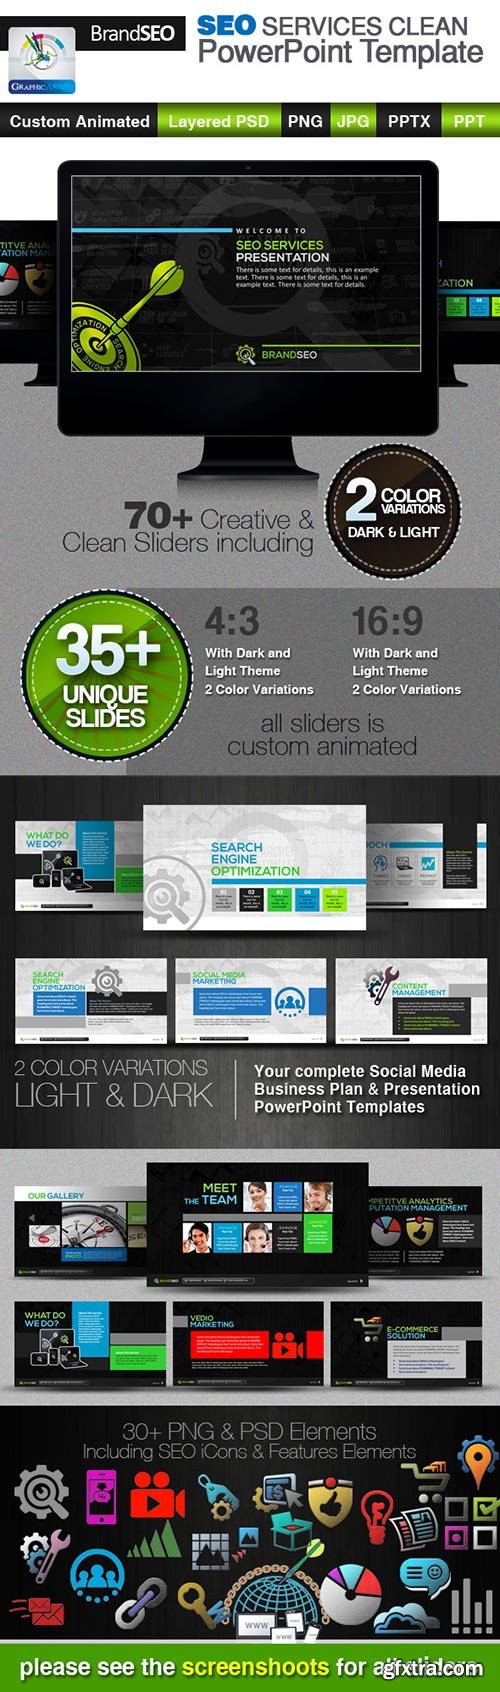 Graphicriver - BrandSEO: SEO Services PowerPoint Templates 4240112